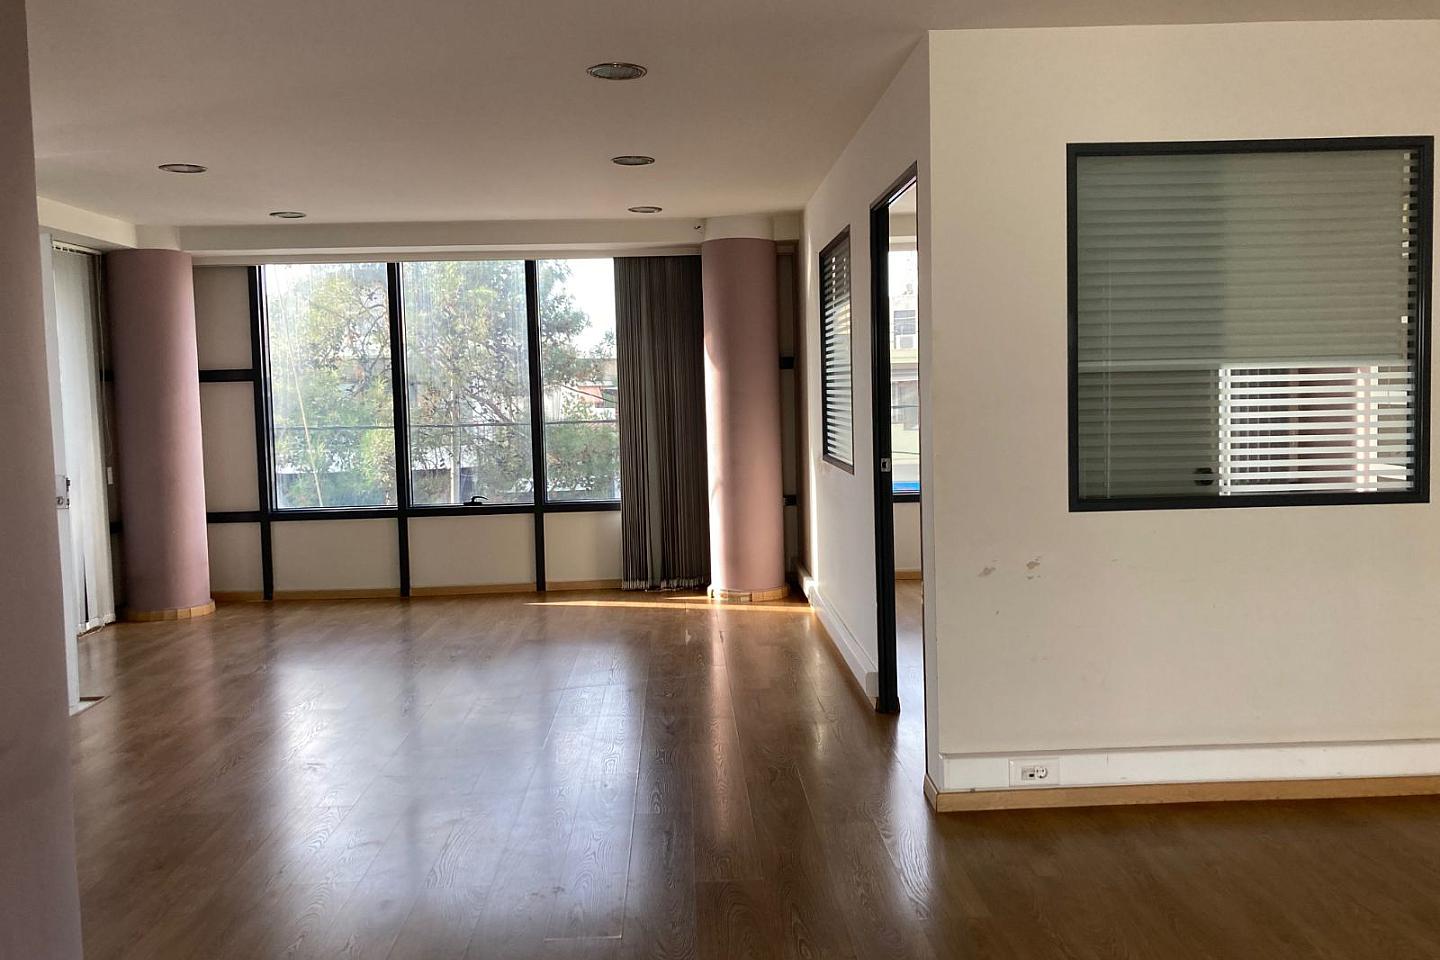 Office for rent in Glyfada center